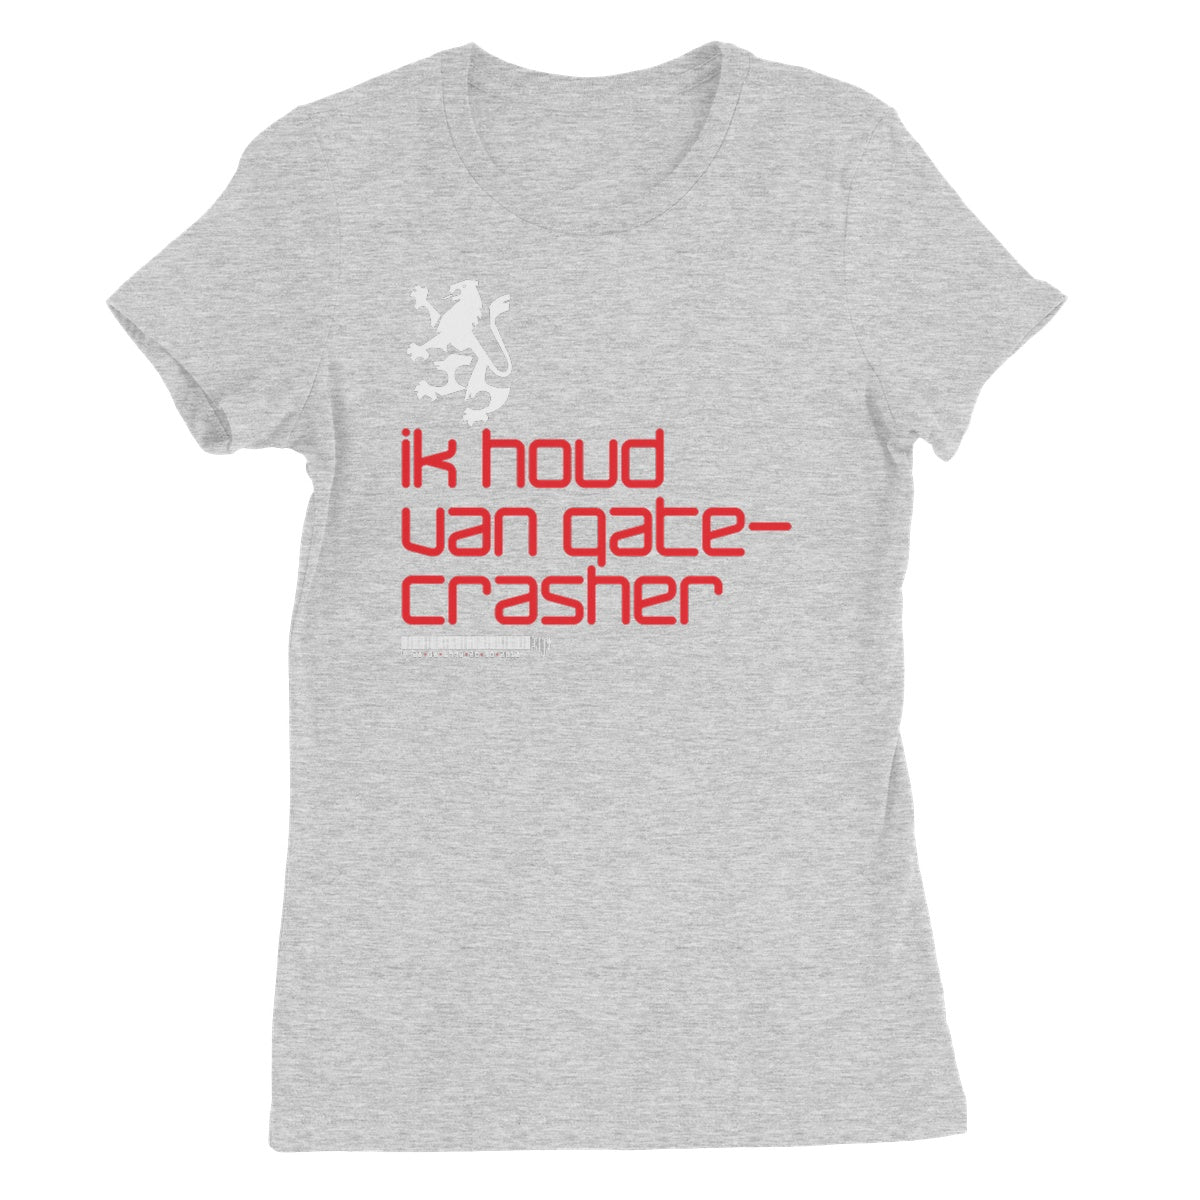 One for the Crazy Dutch Guys Womens Favourite T-Shirt